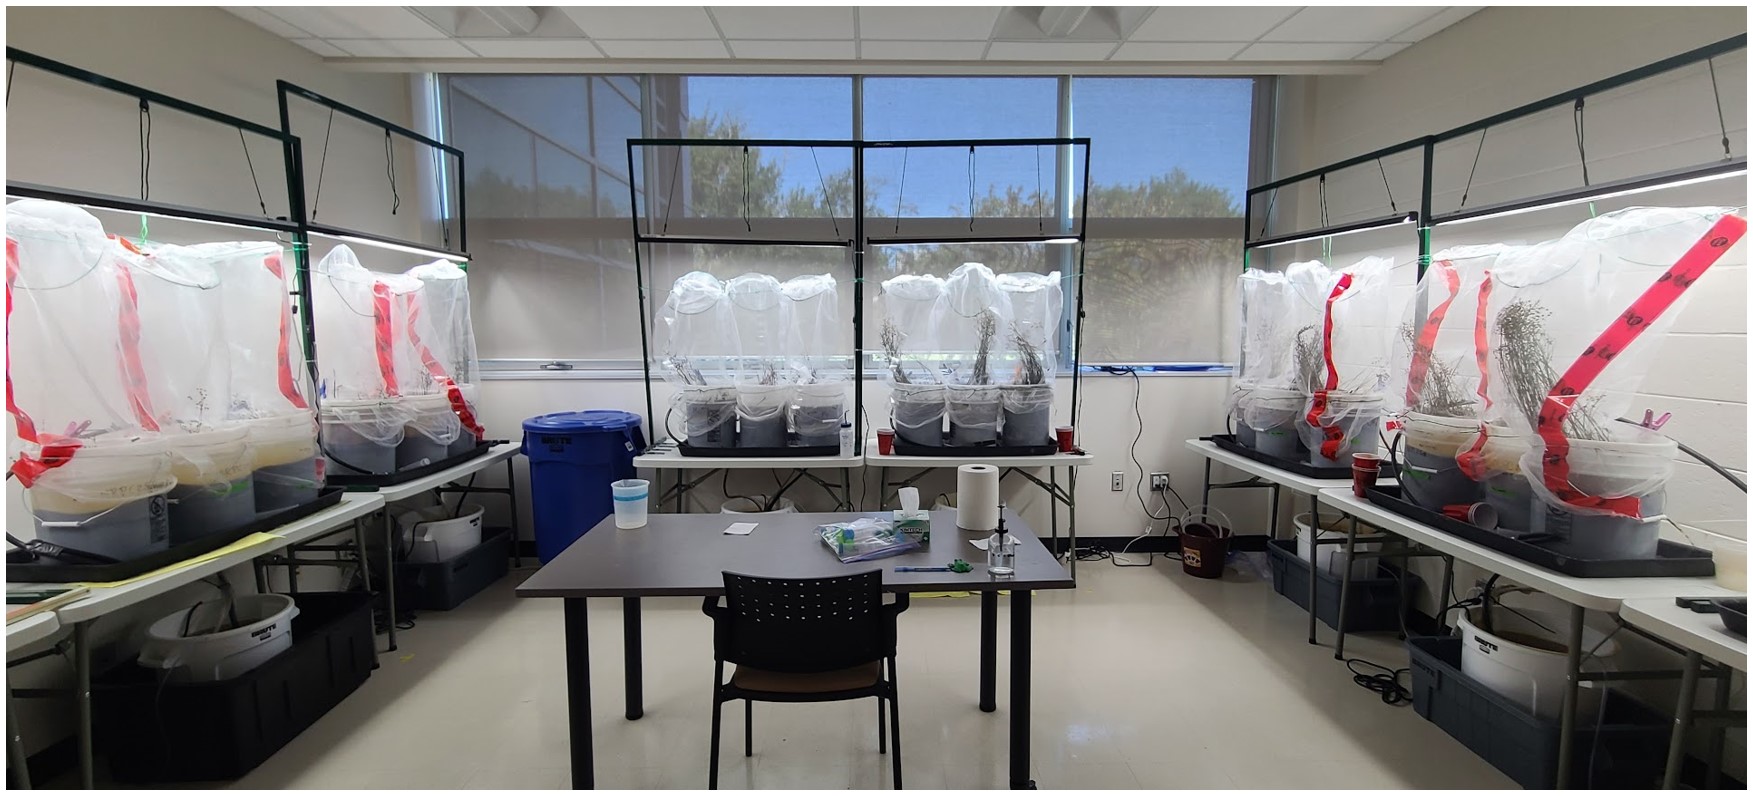 A laboratory with white buckets lined up along all walls. Buckets are covered in mesh and well-light.